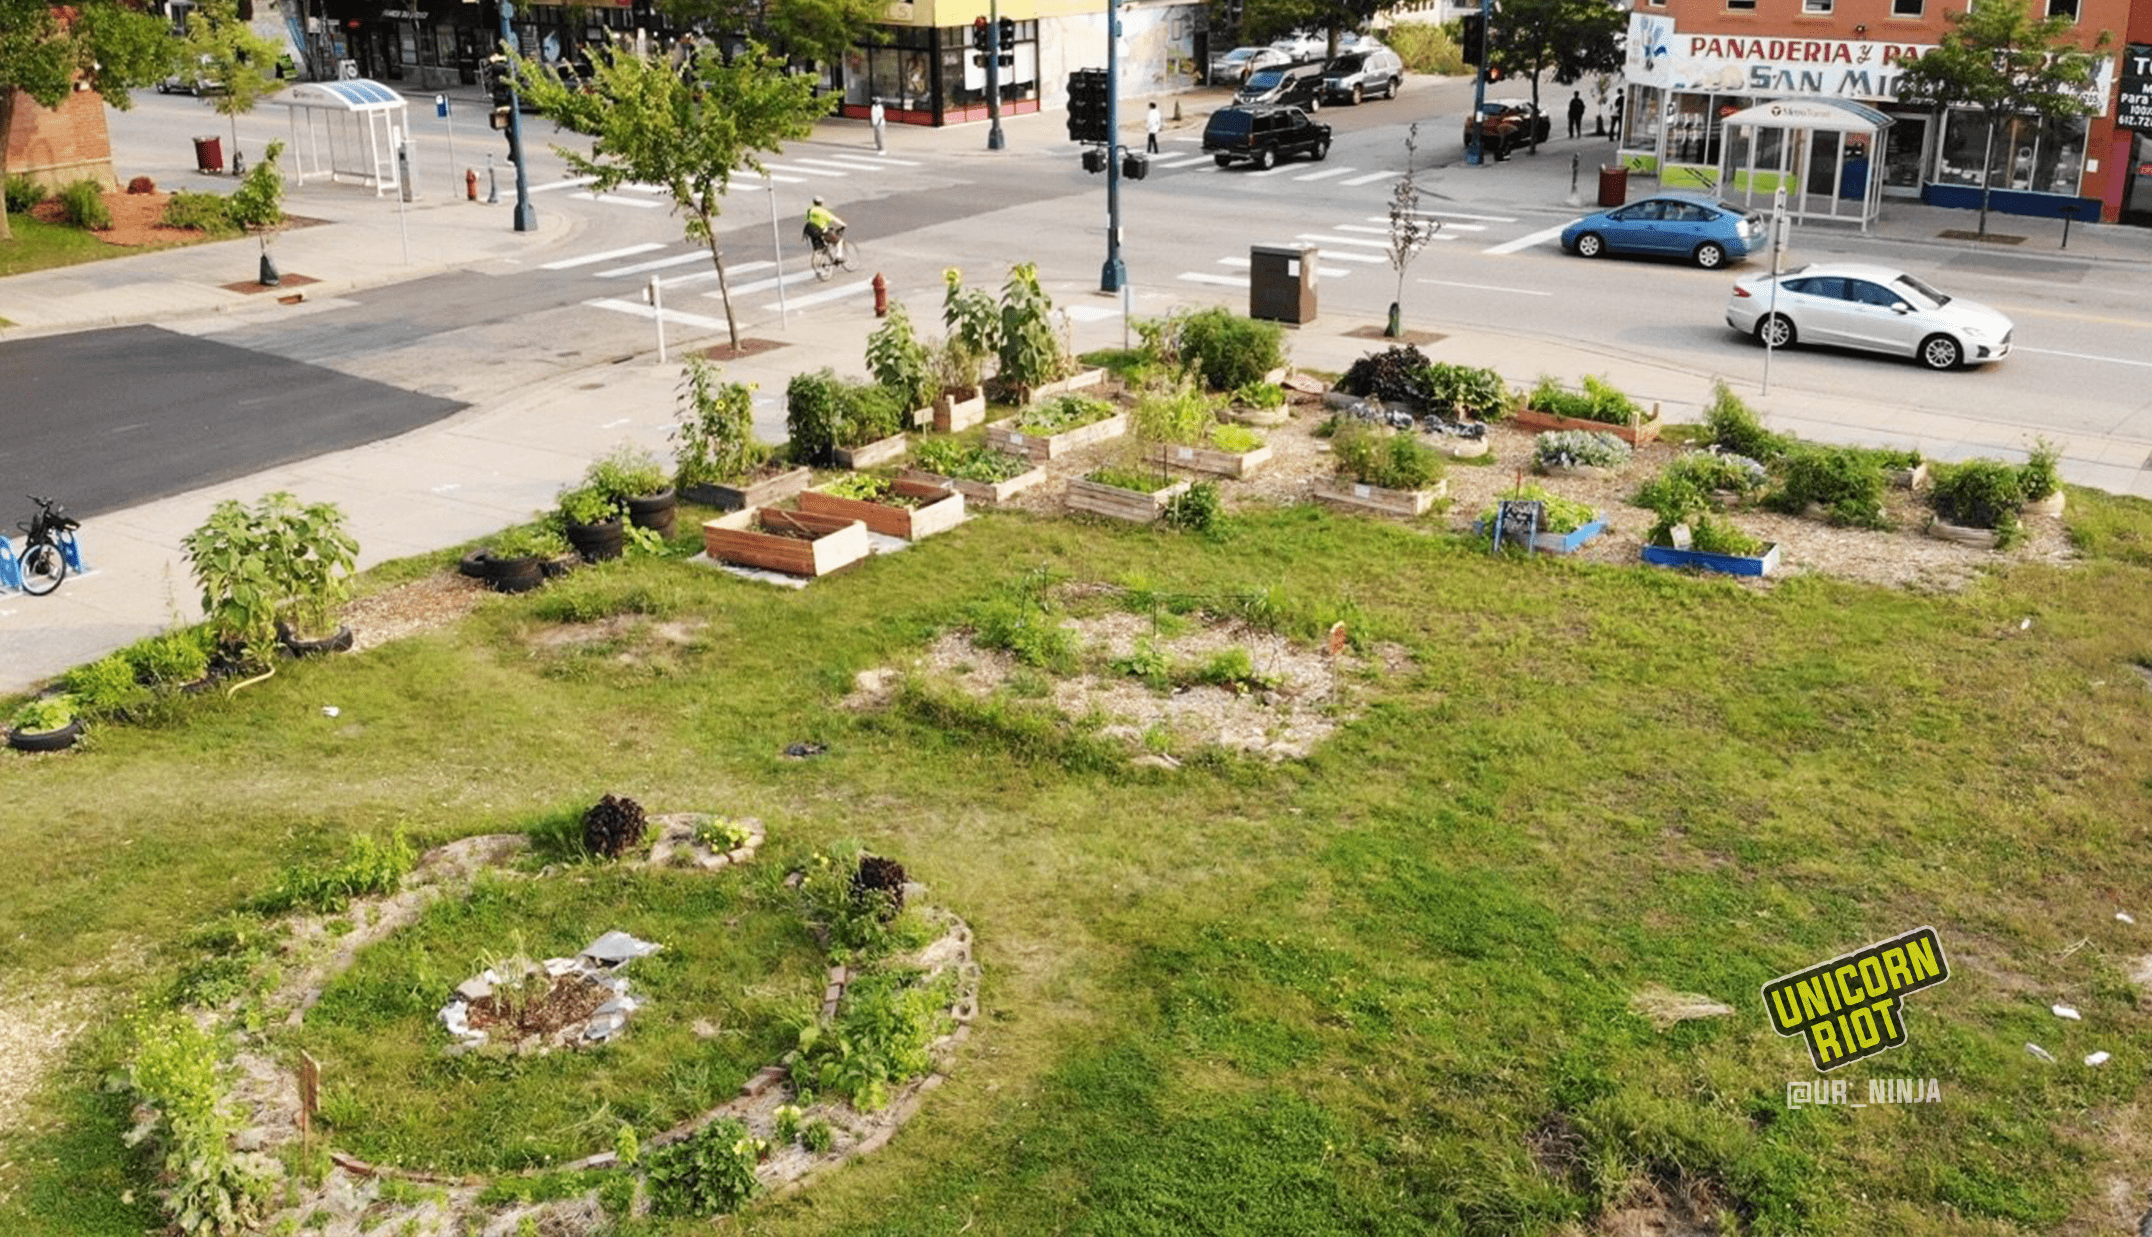 image: an overhead shot of the Lake Street Open Growth Space showing garden beds around the perimeter beside 17th avenue and Lake street. To the left of the photo there is a circular garden with herbs and medicinal plants planted alongside flowers around a plum tree. Across Lake street is a local Panaderia / Tortilleria.